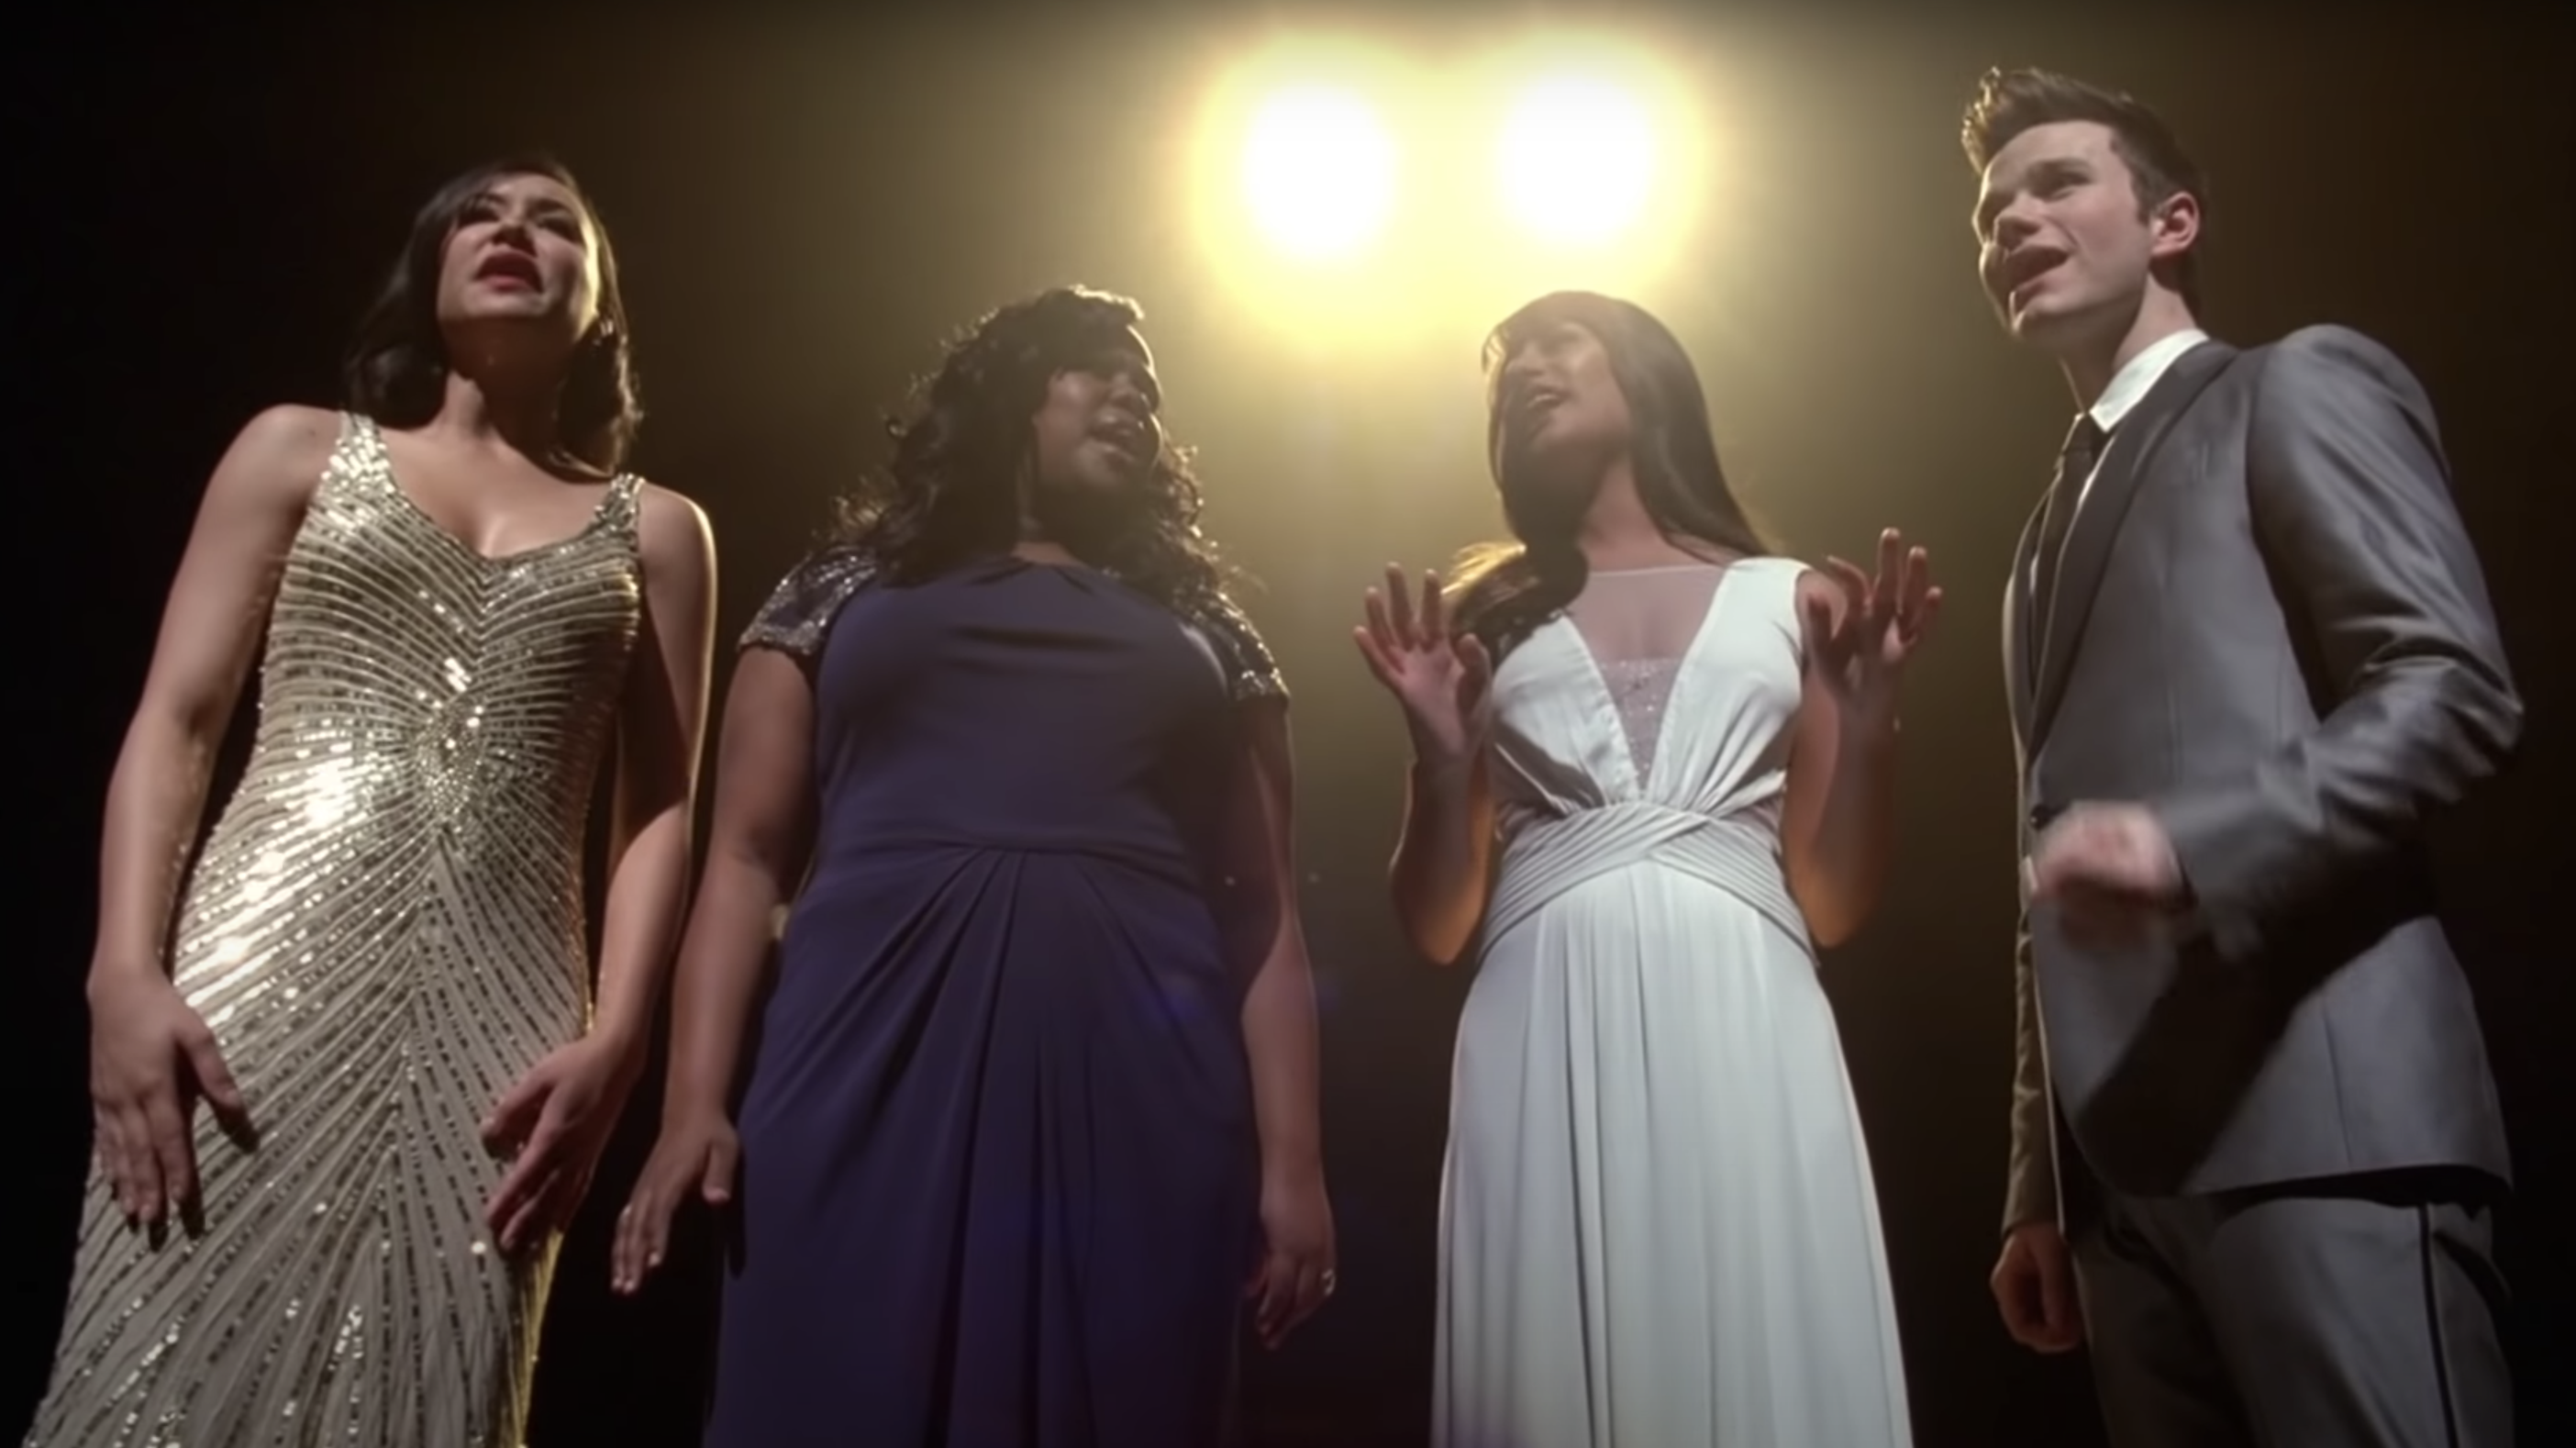 Mercedes, Santana, Rachel in gowns and Kurt in a suit all performing onstage